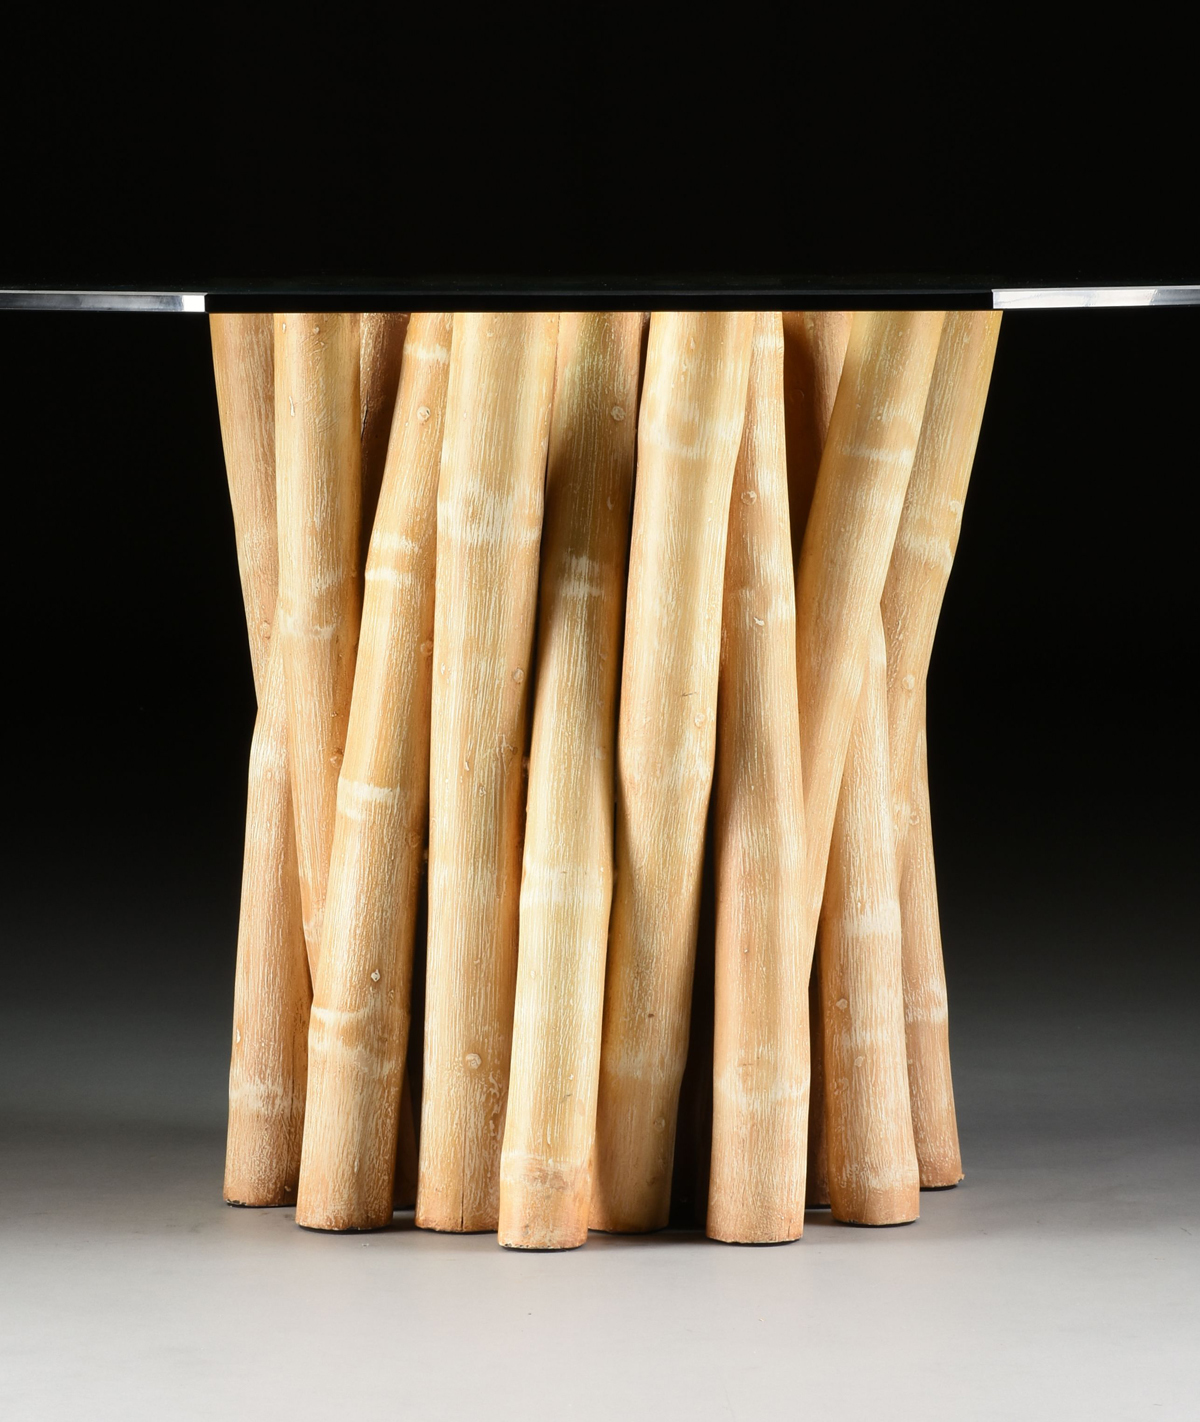 A VINTAGE MODERN AMERICAN GLASS TOPPED AND WHITEWASHED BAMBOO CENTER TABLE, BY BUDJI LAYUG, CIRCA - Image 2 of 6